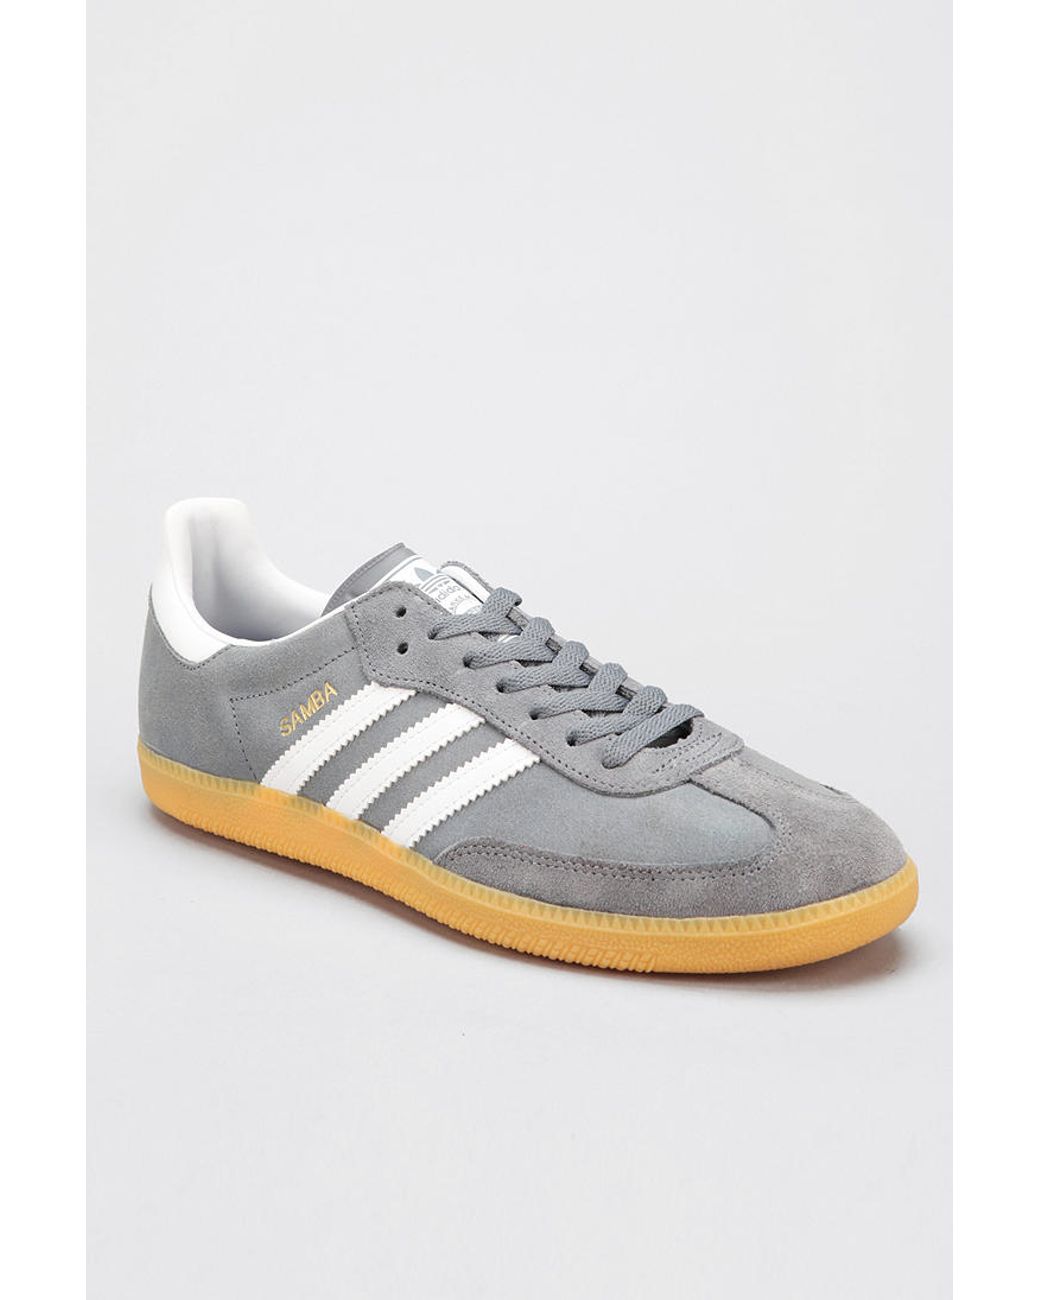 Urban Outfitters Samba Suede Sneaker in Gray for Men | Lyst